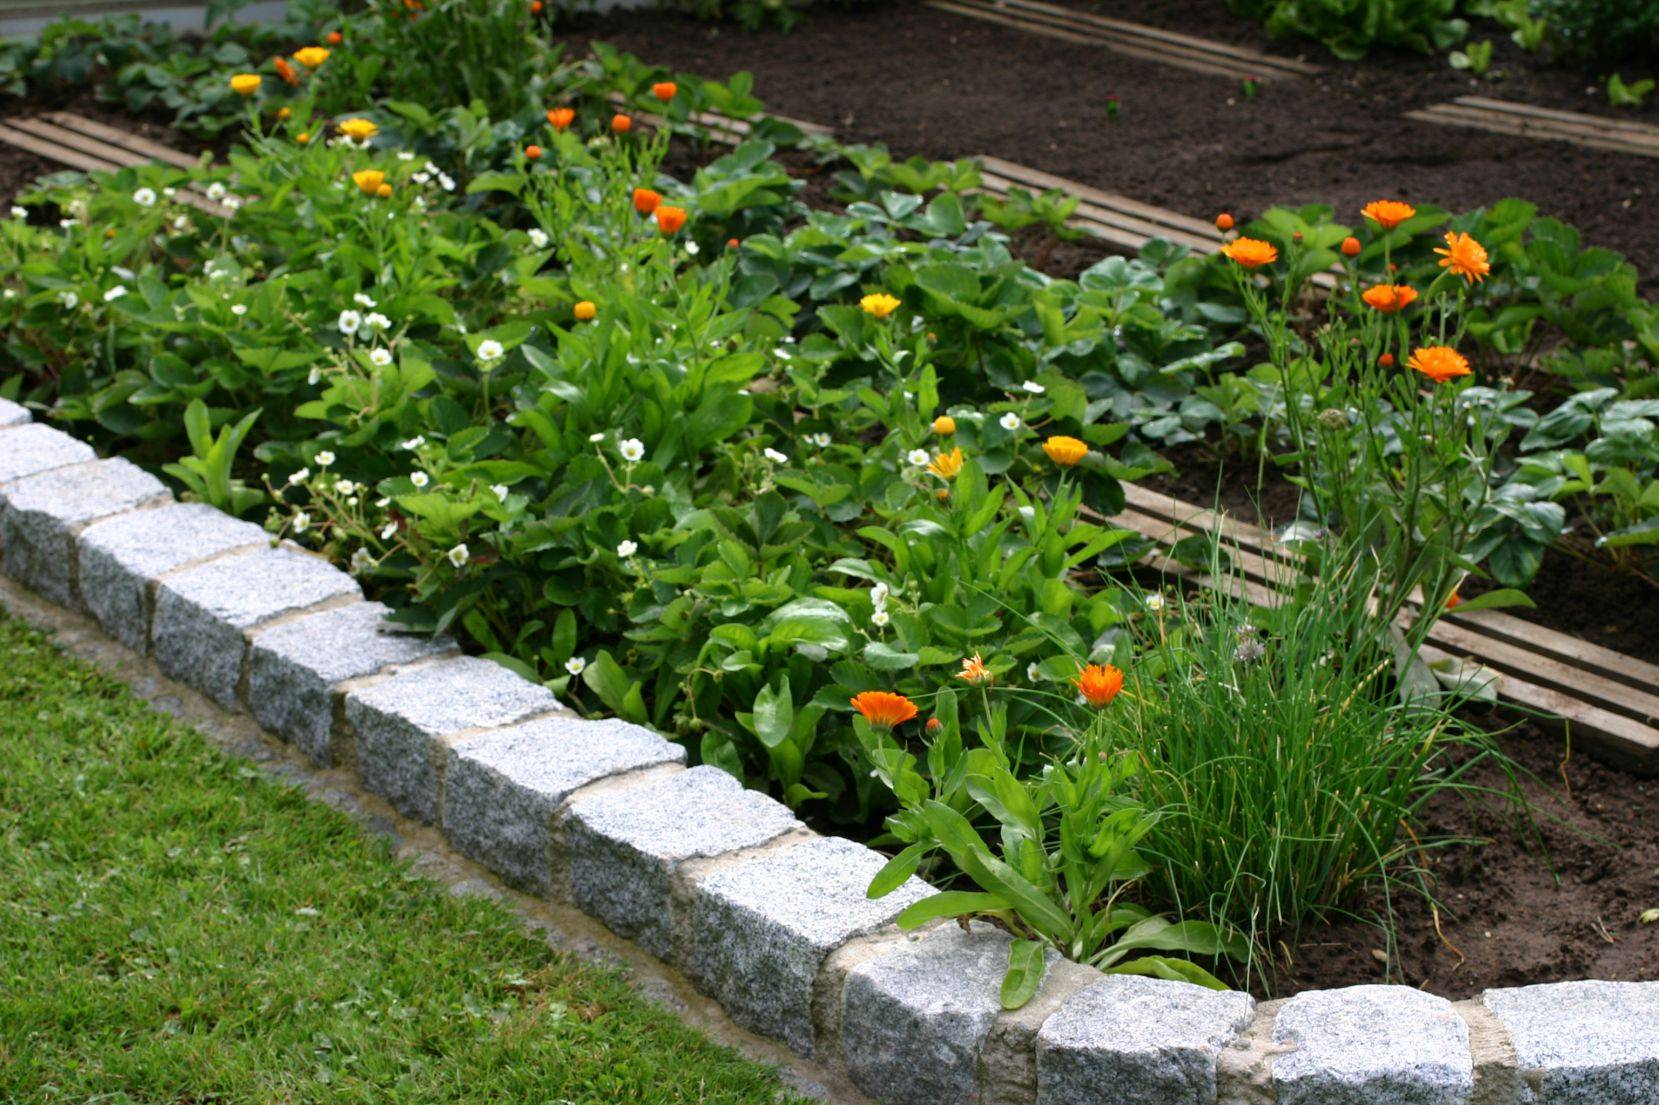 An image of a flower bed with cobblestone edging as a garden border